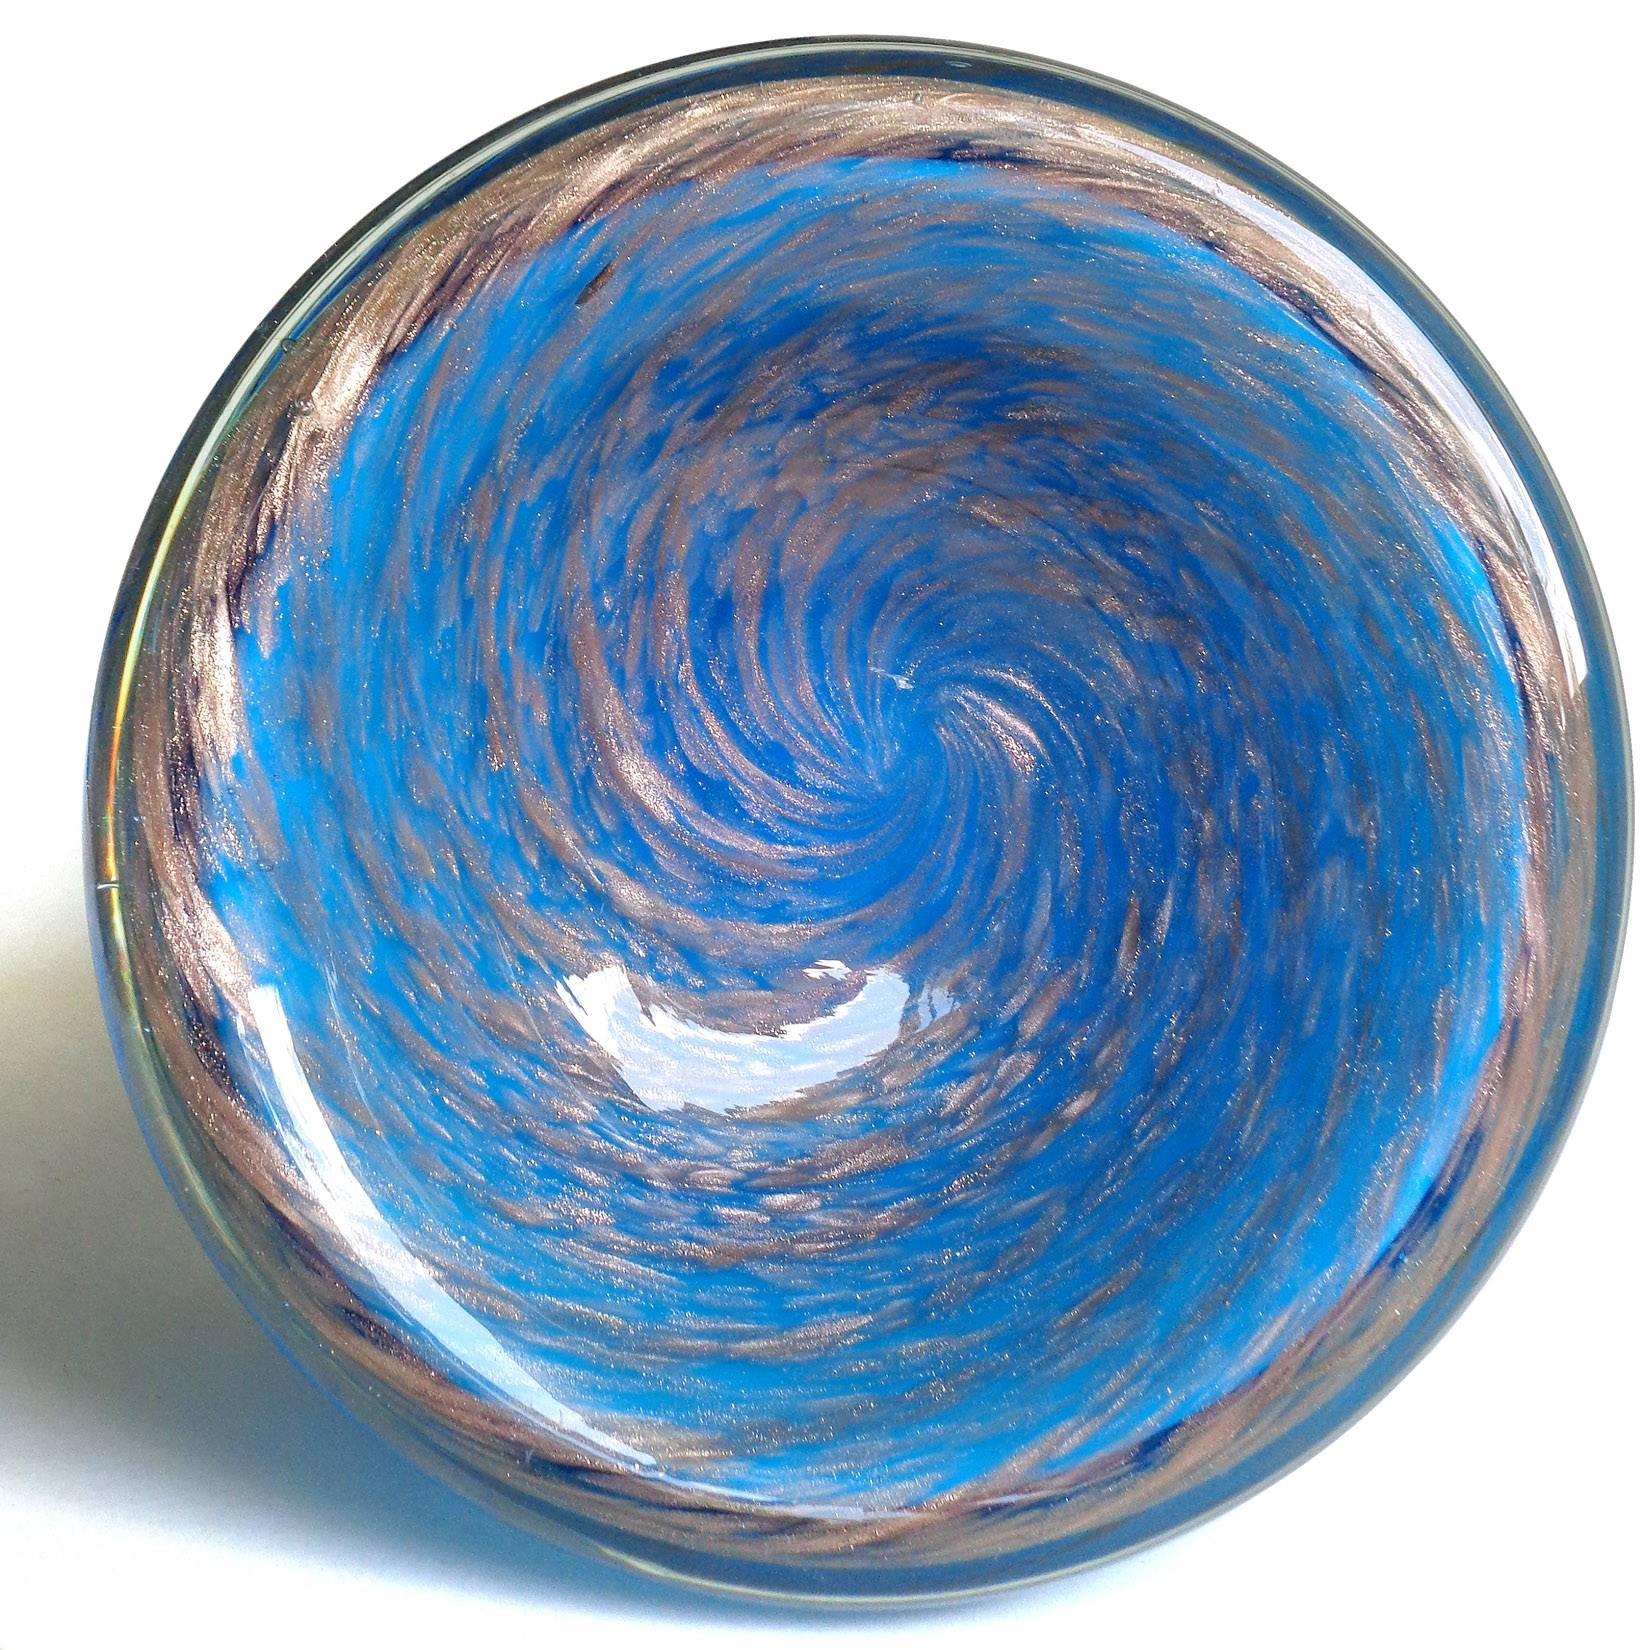 Free shipping worldwide! See details below description.

Beautiful Murano handblown blue and copper aventurine flecks art glass inverted shallow bowl. Documented to the Fratelli Toso company. The piece has a candy cane design and glitters in the